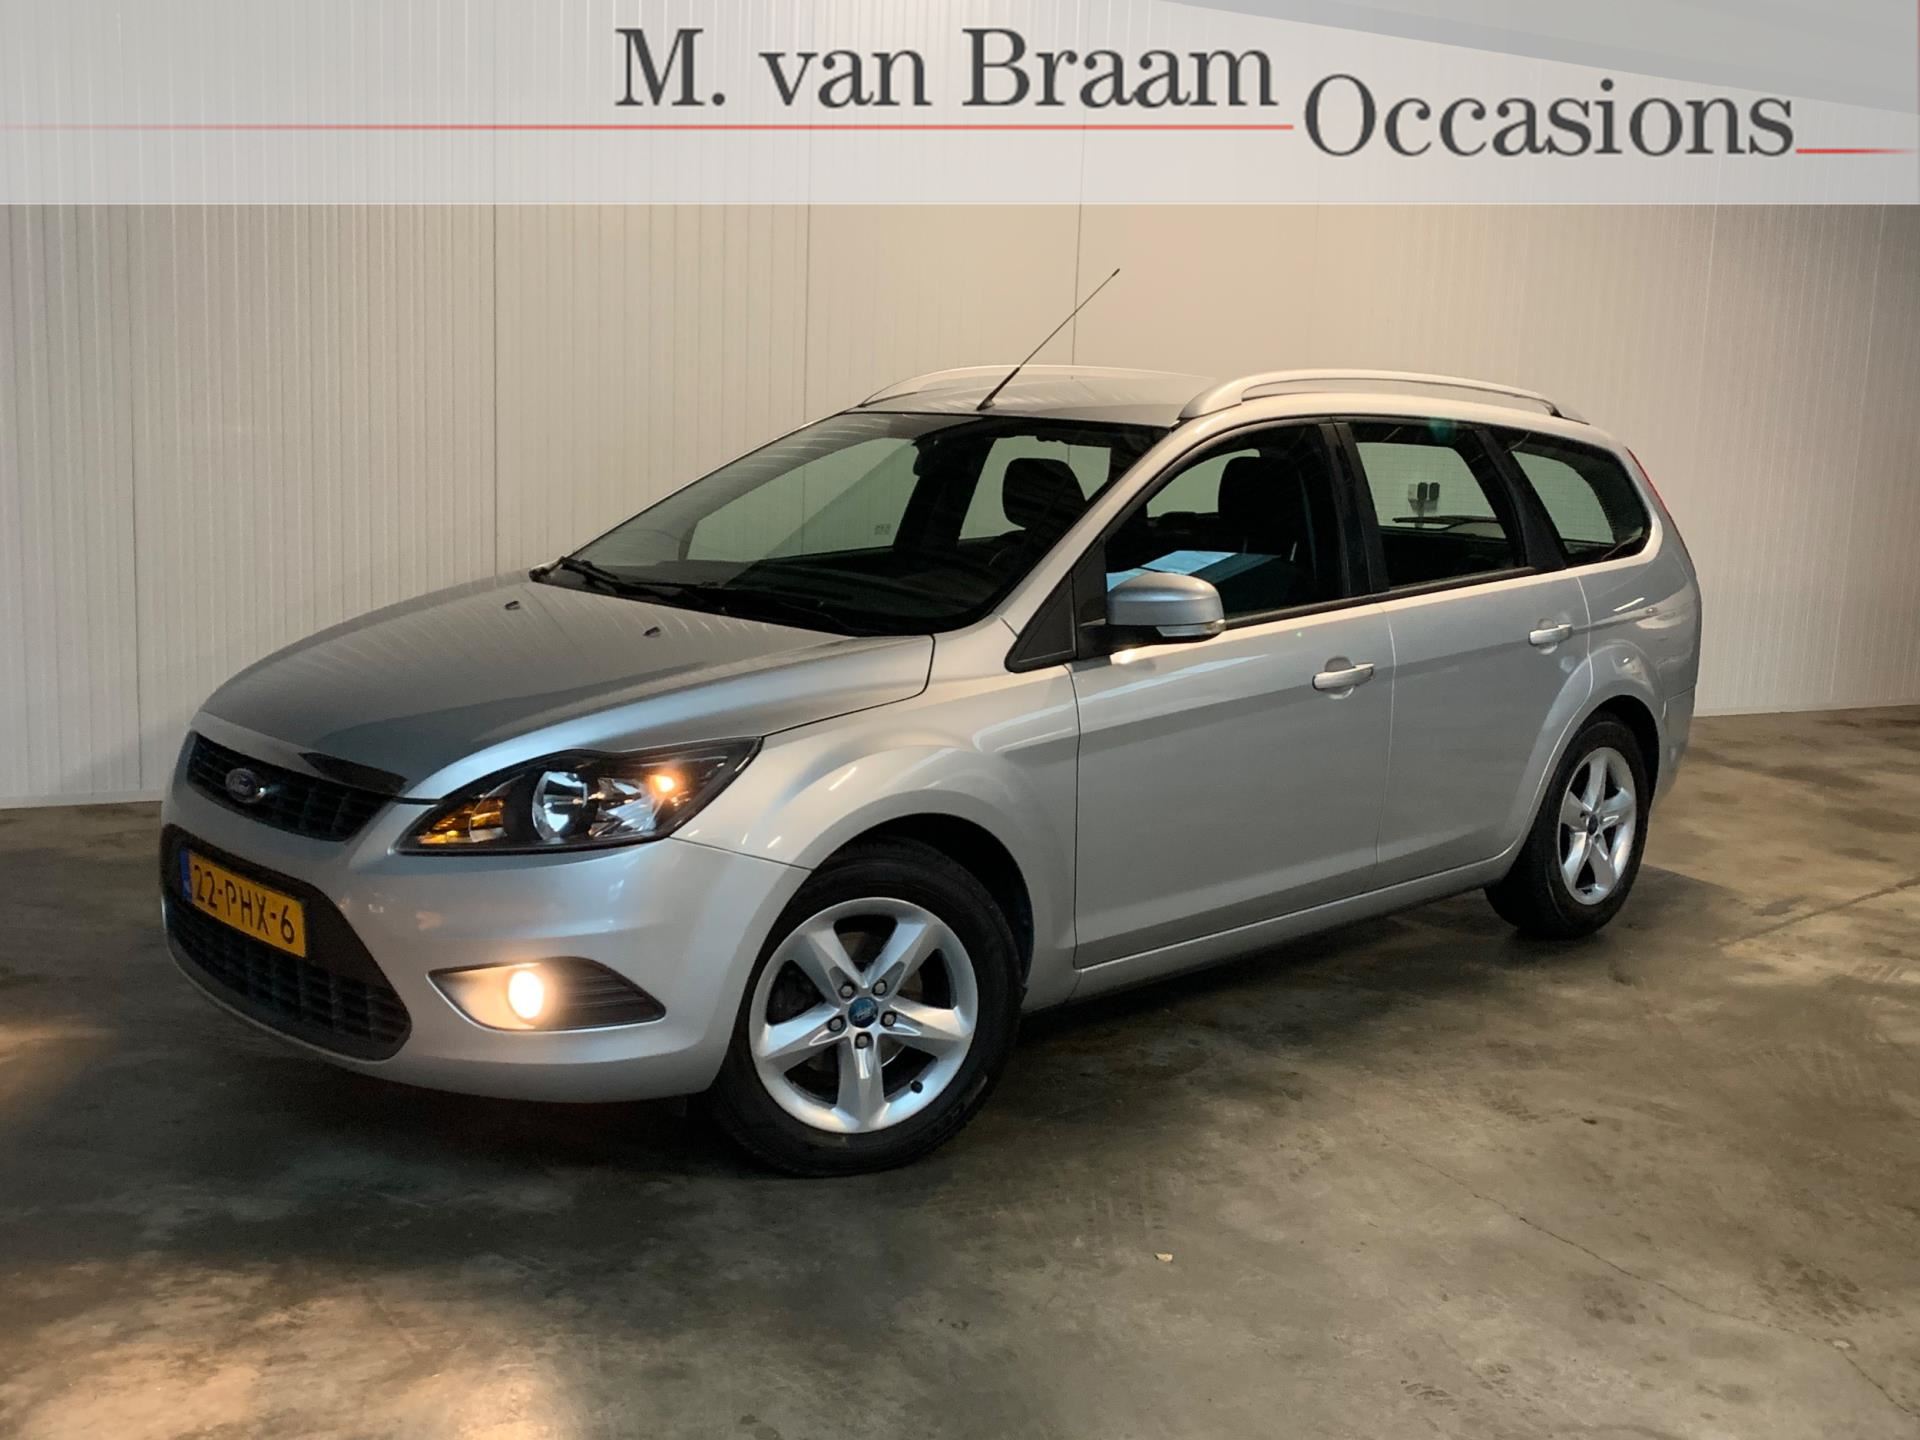 Ford Focus Wagon occasion - M. van Braam Occasions